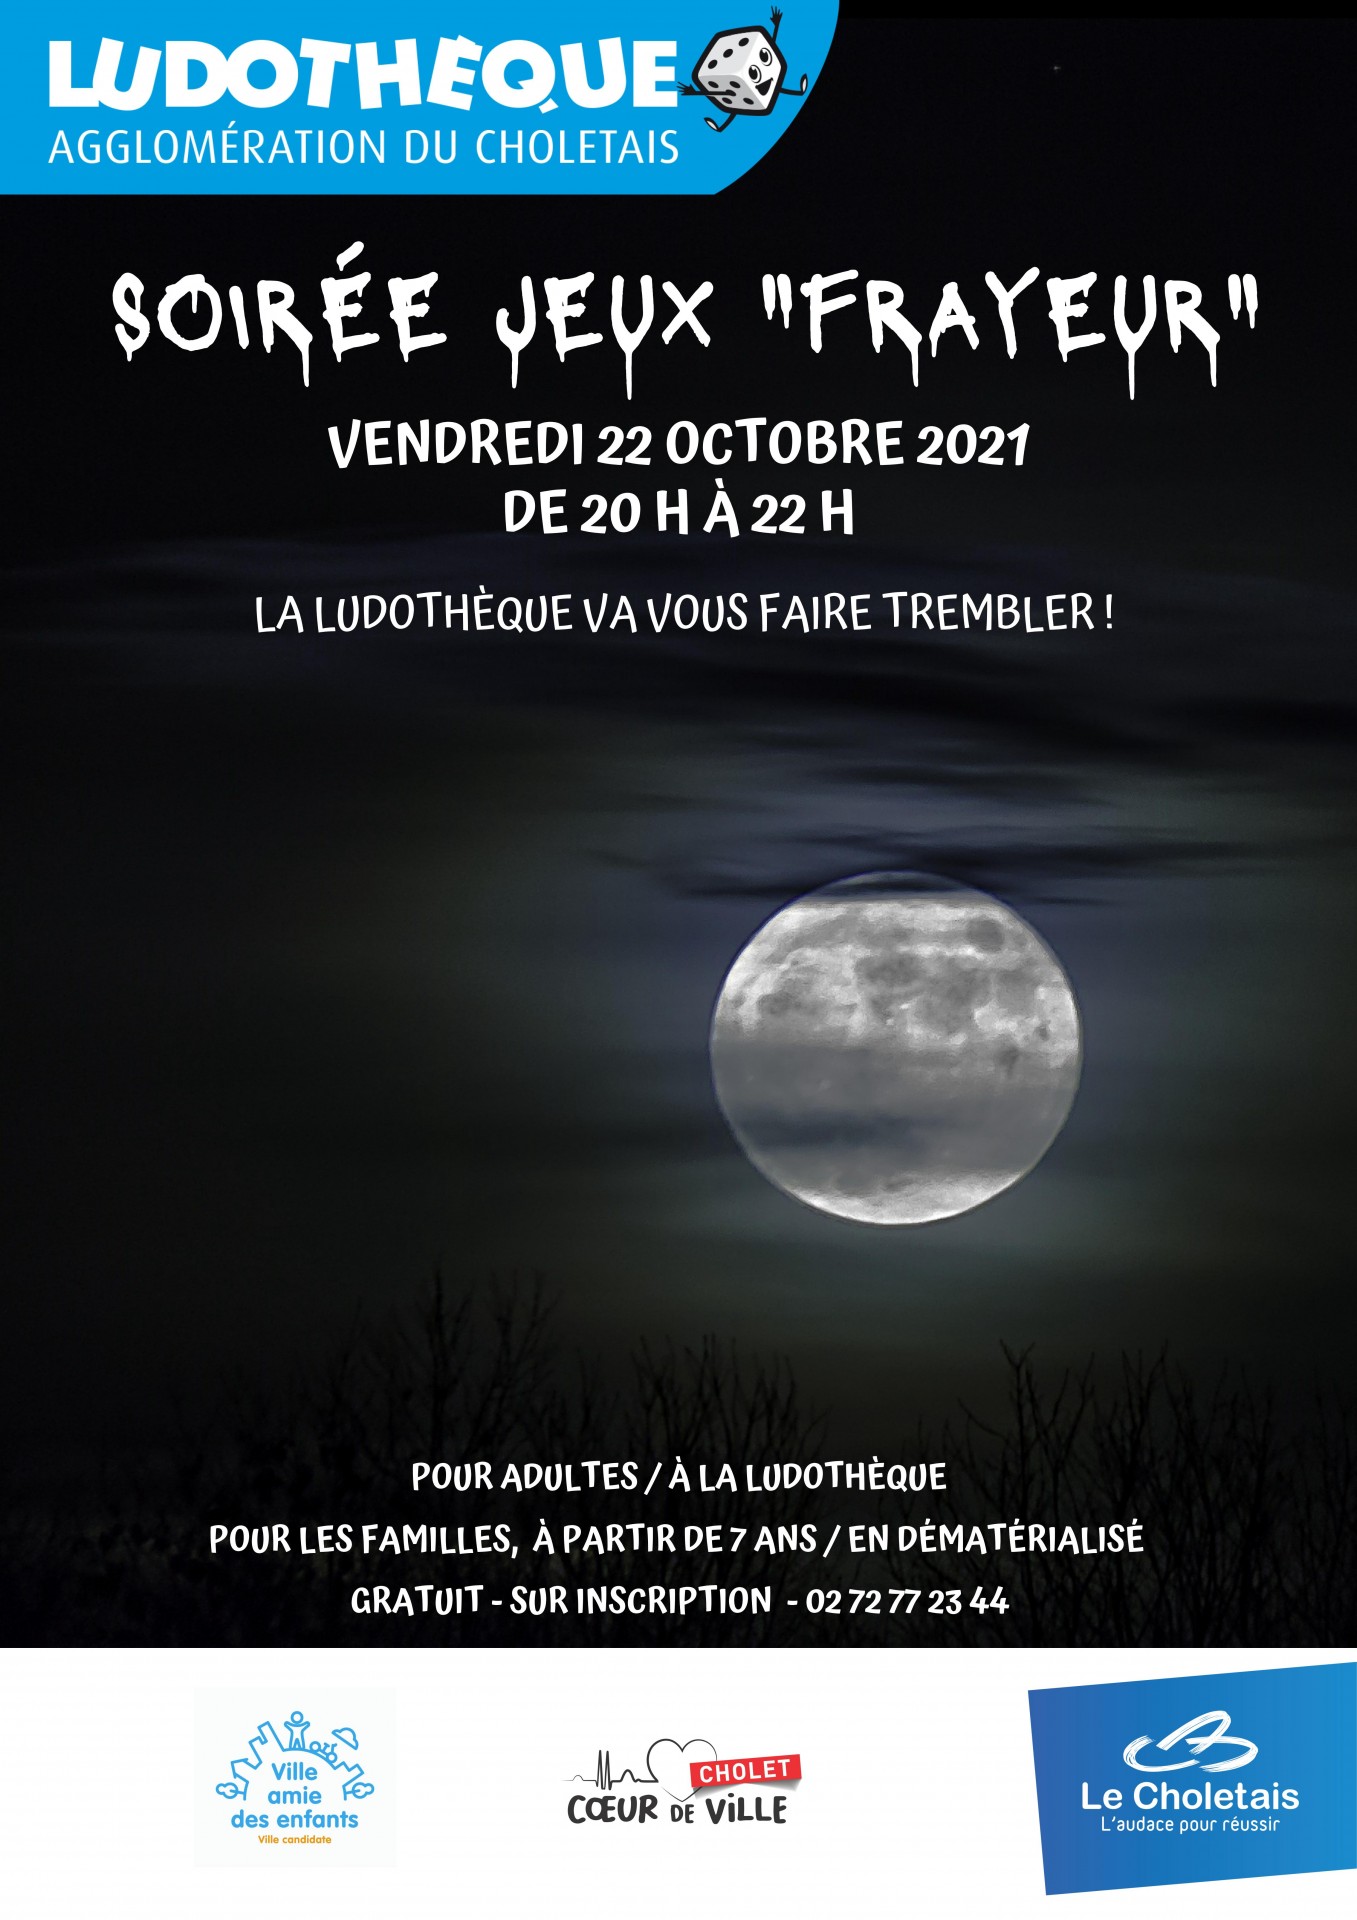 soiree-jeux-frayeur-ludotheque-cholet-49